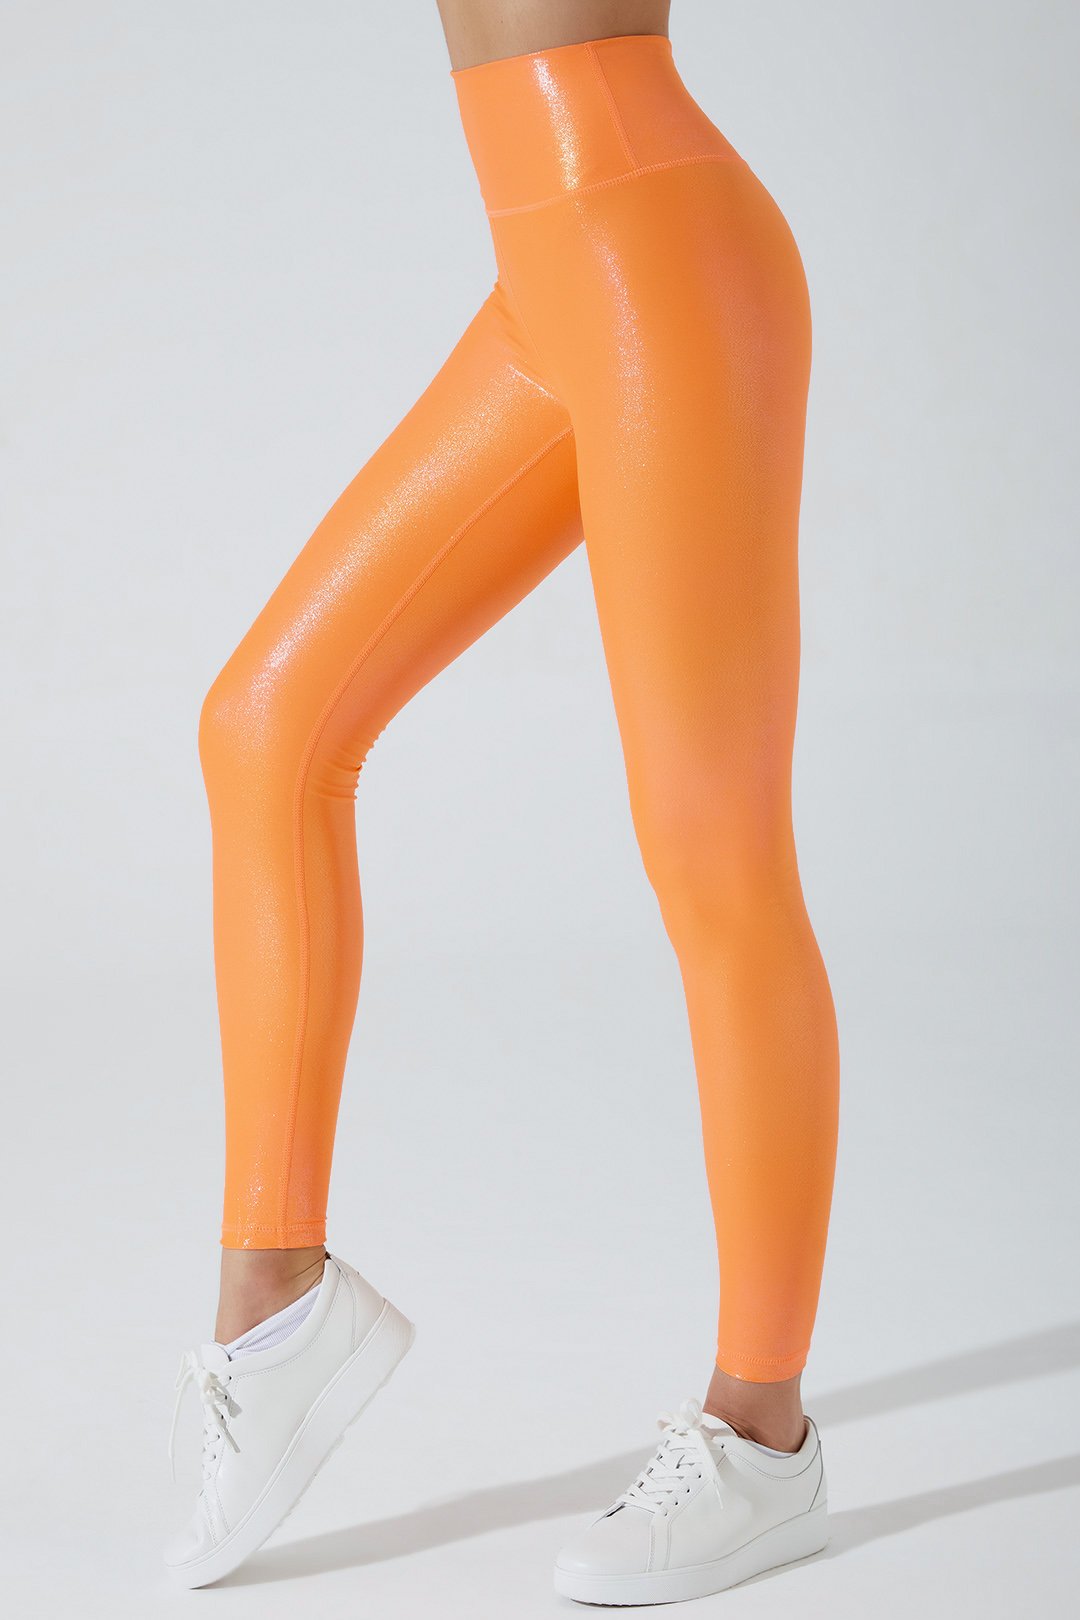 Vibrant jolly orange women's leggings with an iridescent finish, perfect for a stylish look.